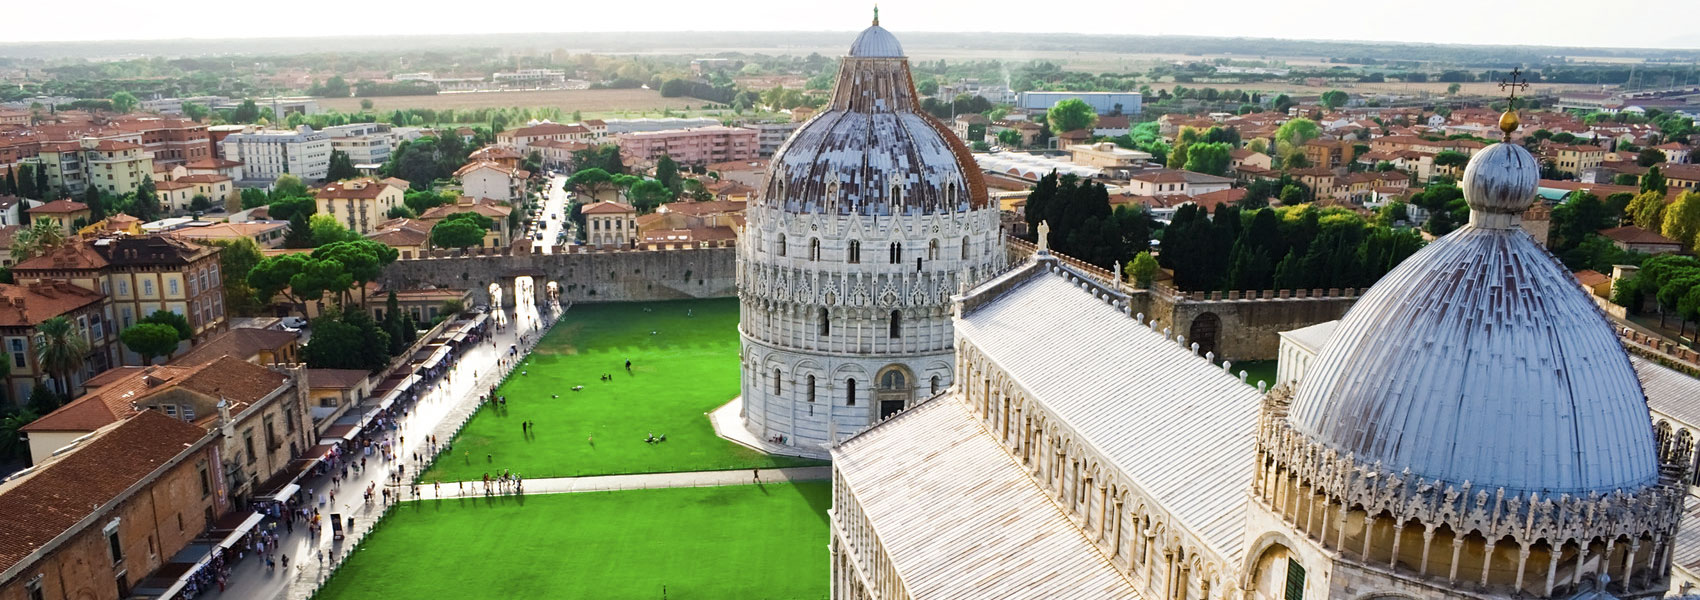 miracle square in Pisa